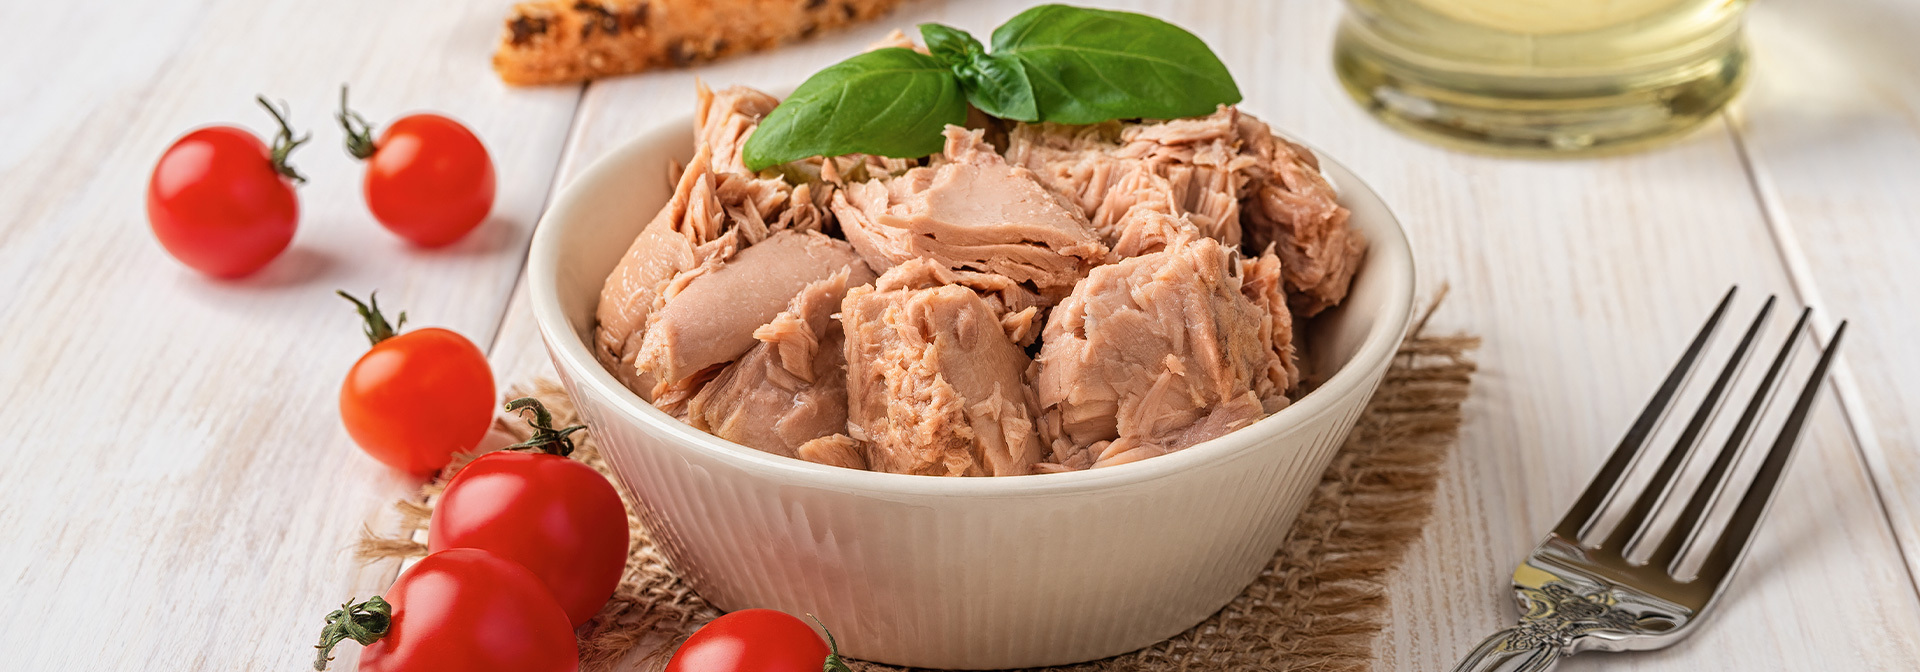 Canned tuna wholesale by KALLAS INC.